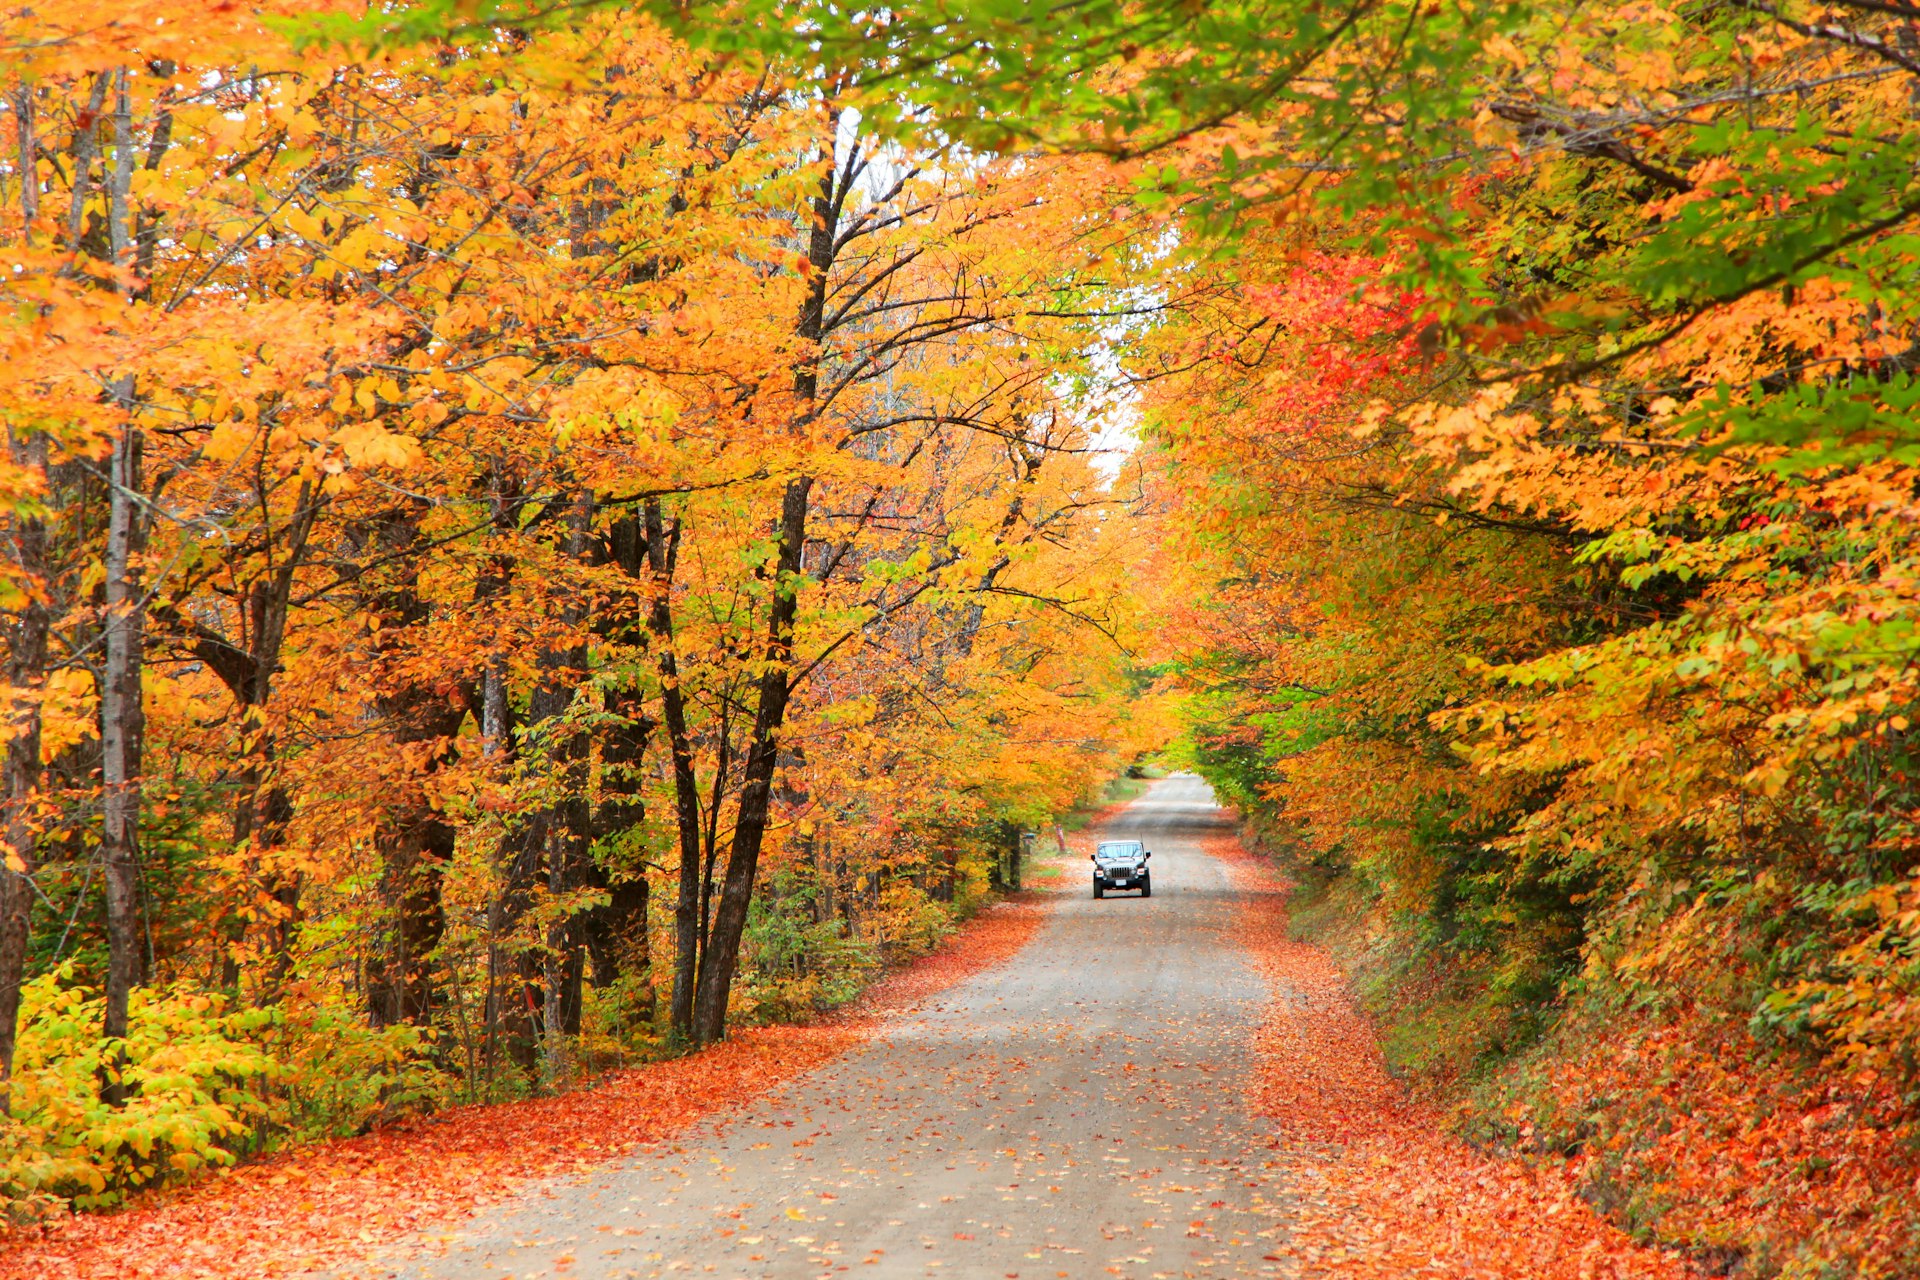 A car drives down a rural road surrounded by colorful fall foliage in Maine